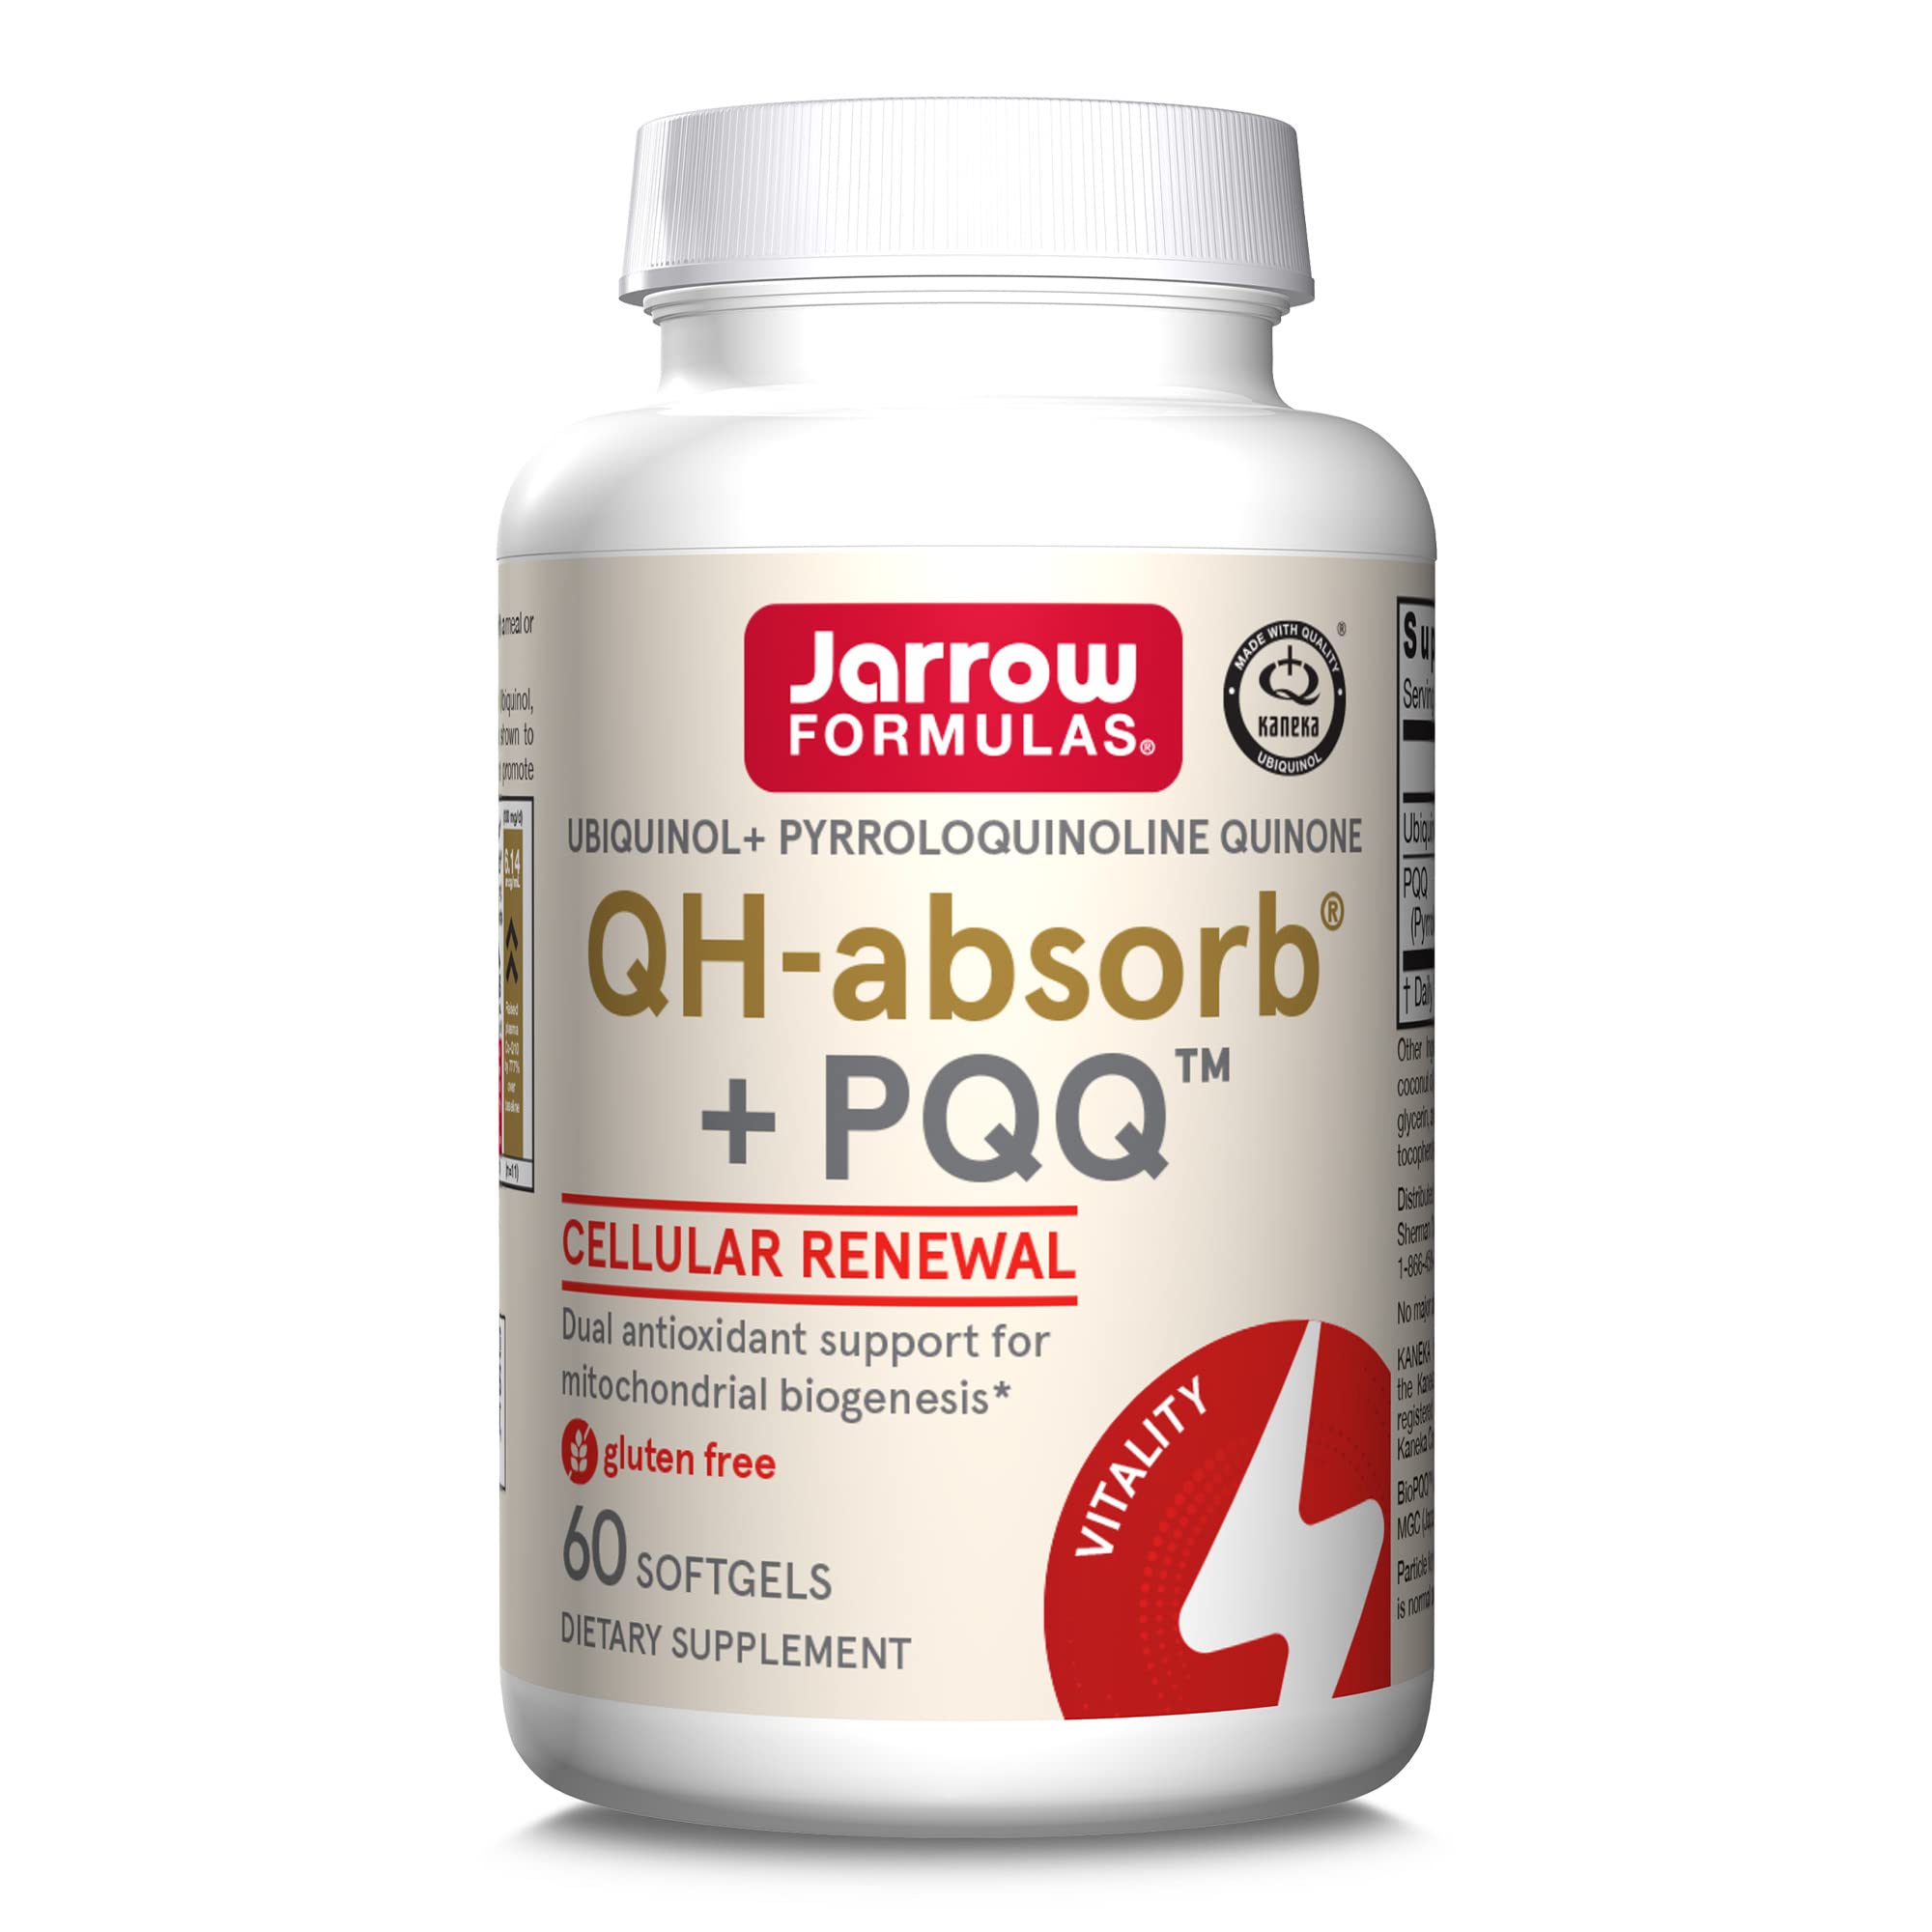 Book Cover Jarrow Formulas QH-Absorb + PQQ - 100 mg Ubiquinol - Up to 60 Servings (Softgels) - Cellular Renewal & Antioxidant Support for Mitochondrial Biogenesis - Dietary Supplement - Gluten Free